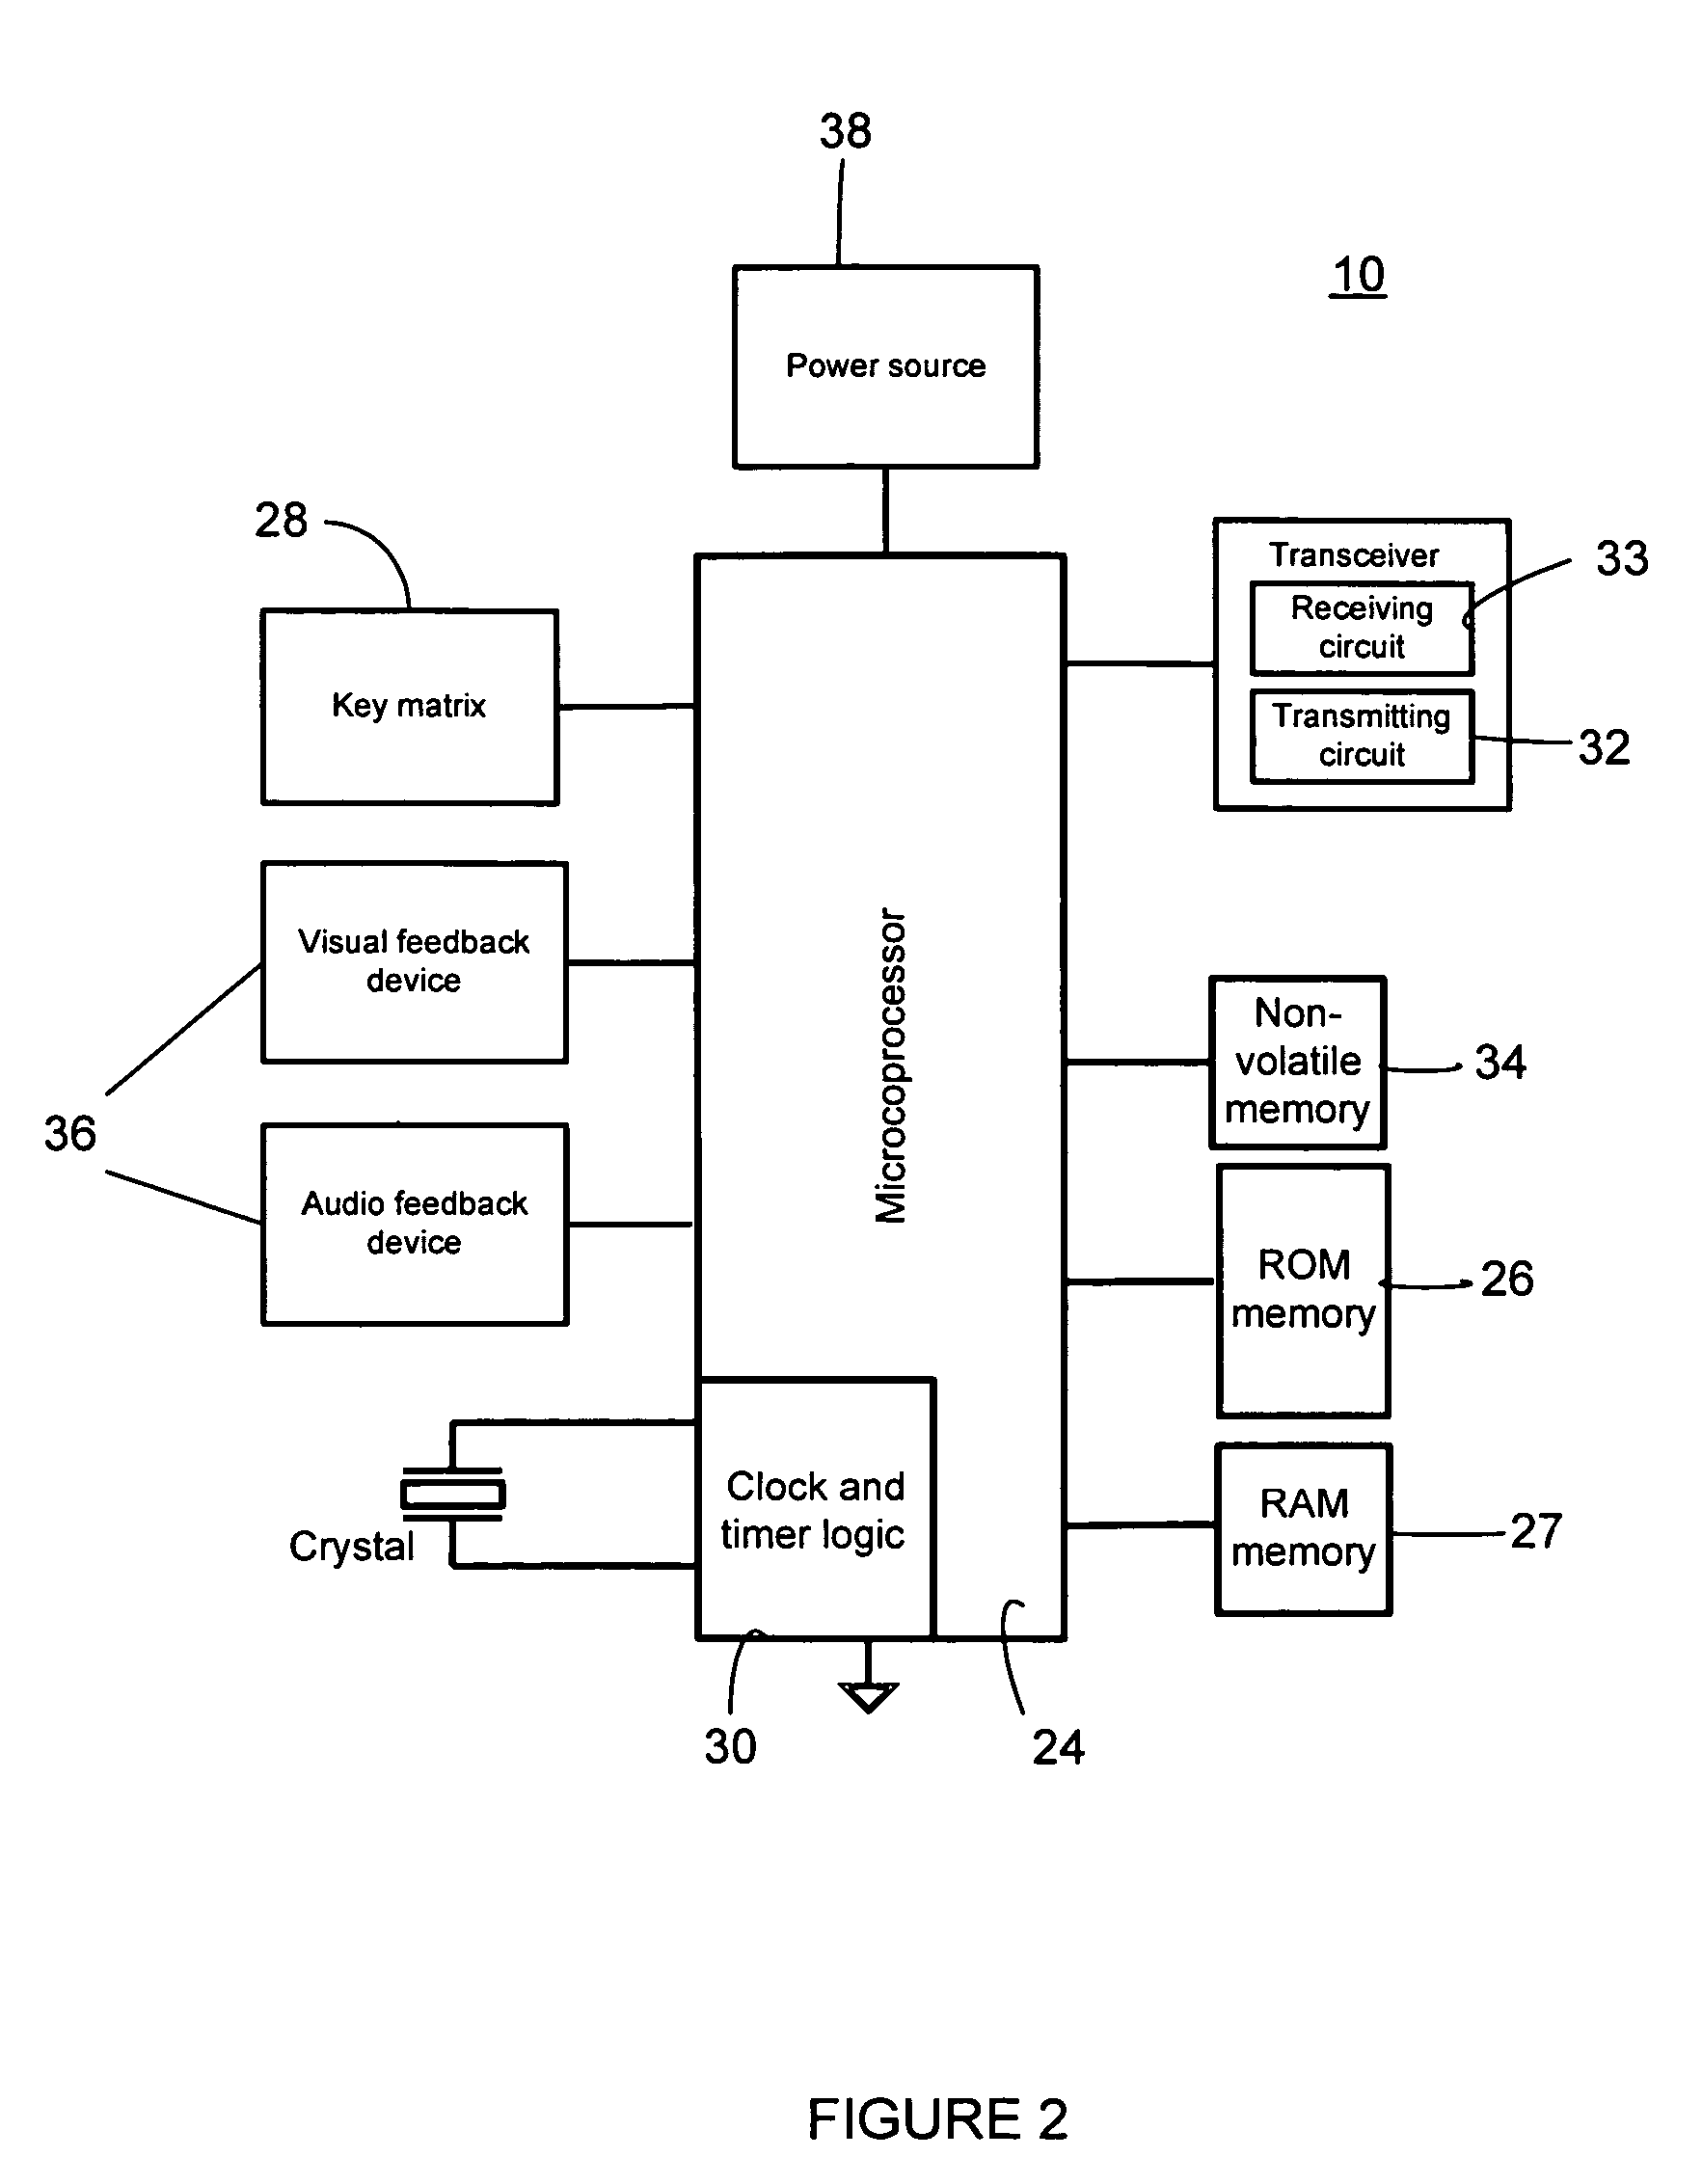 System and methods for home appliance identification and control in a networked environment